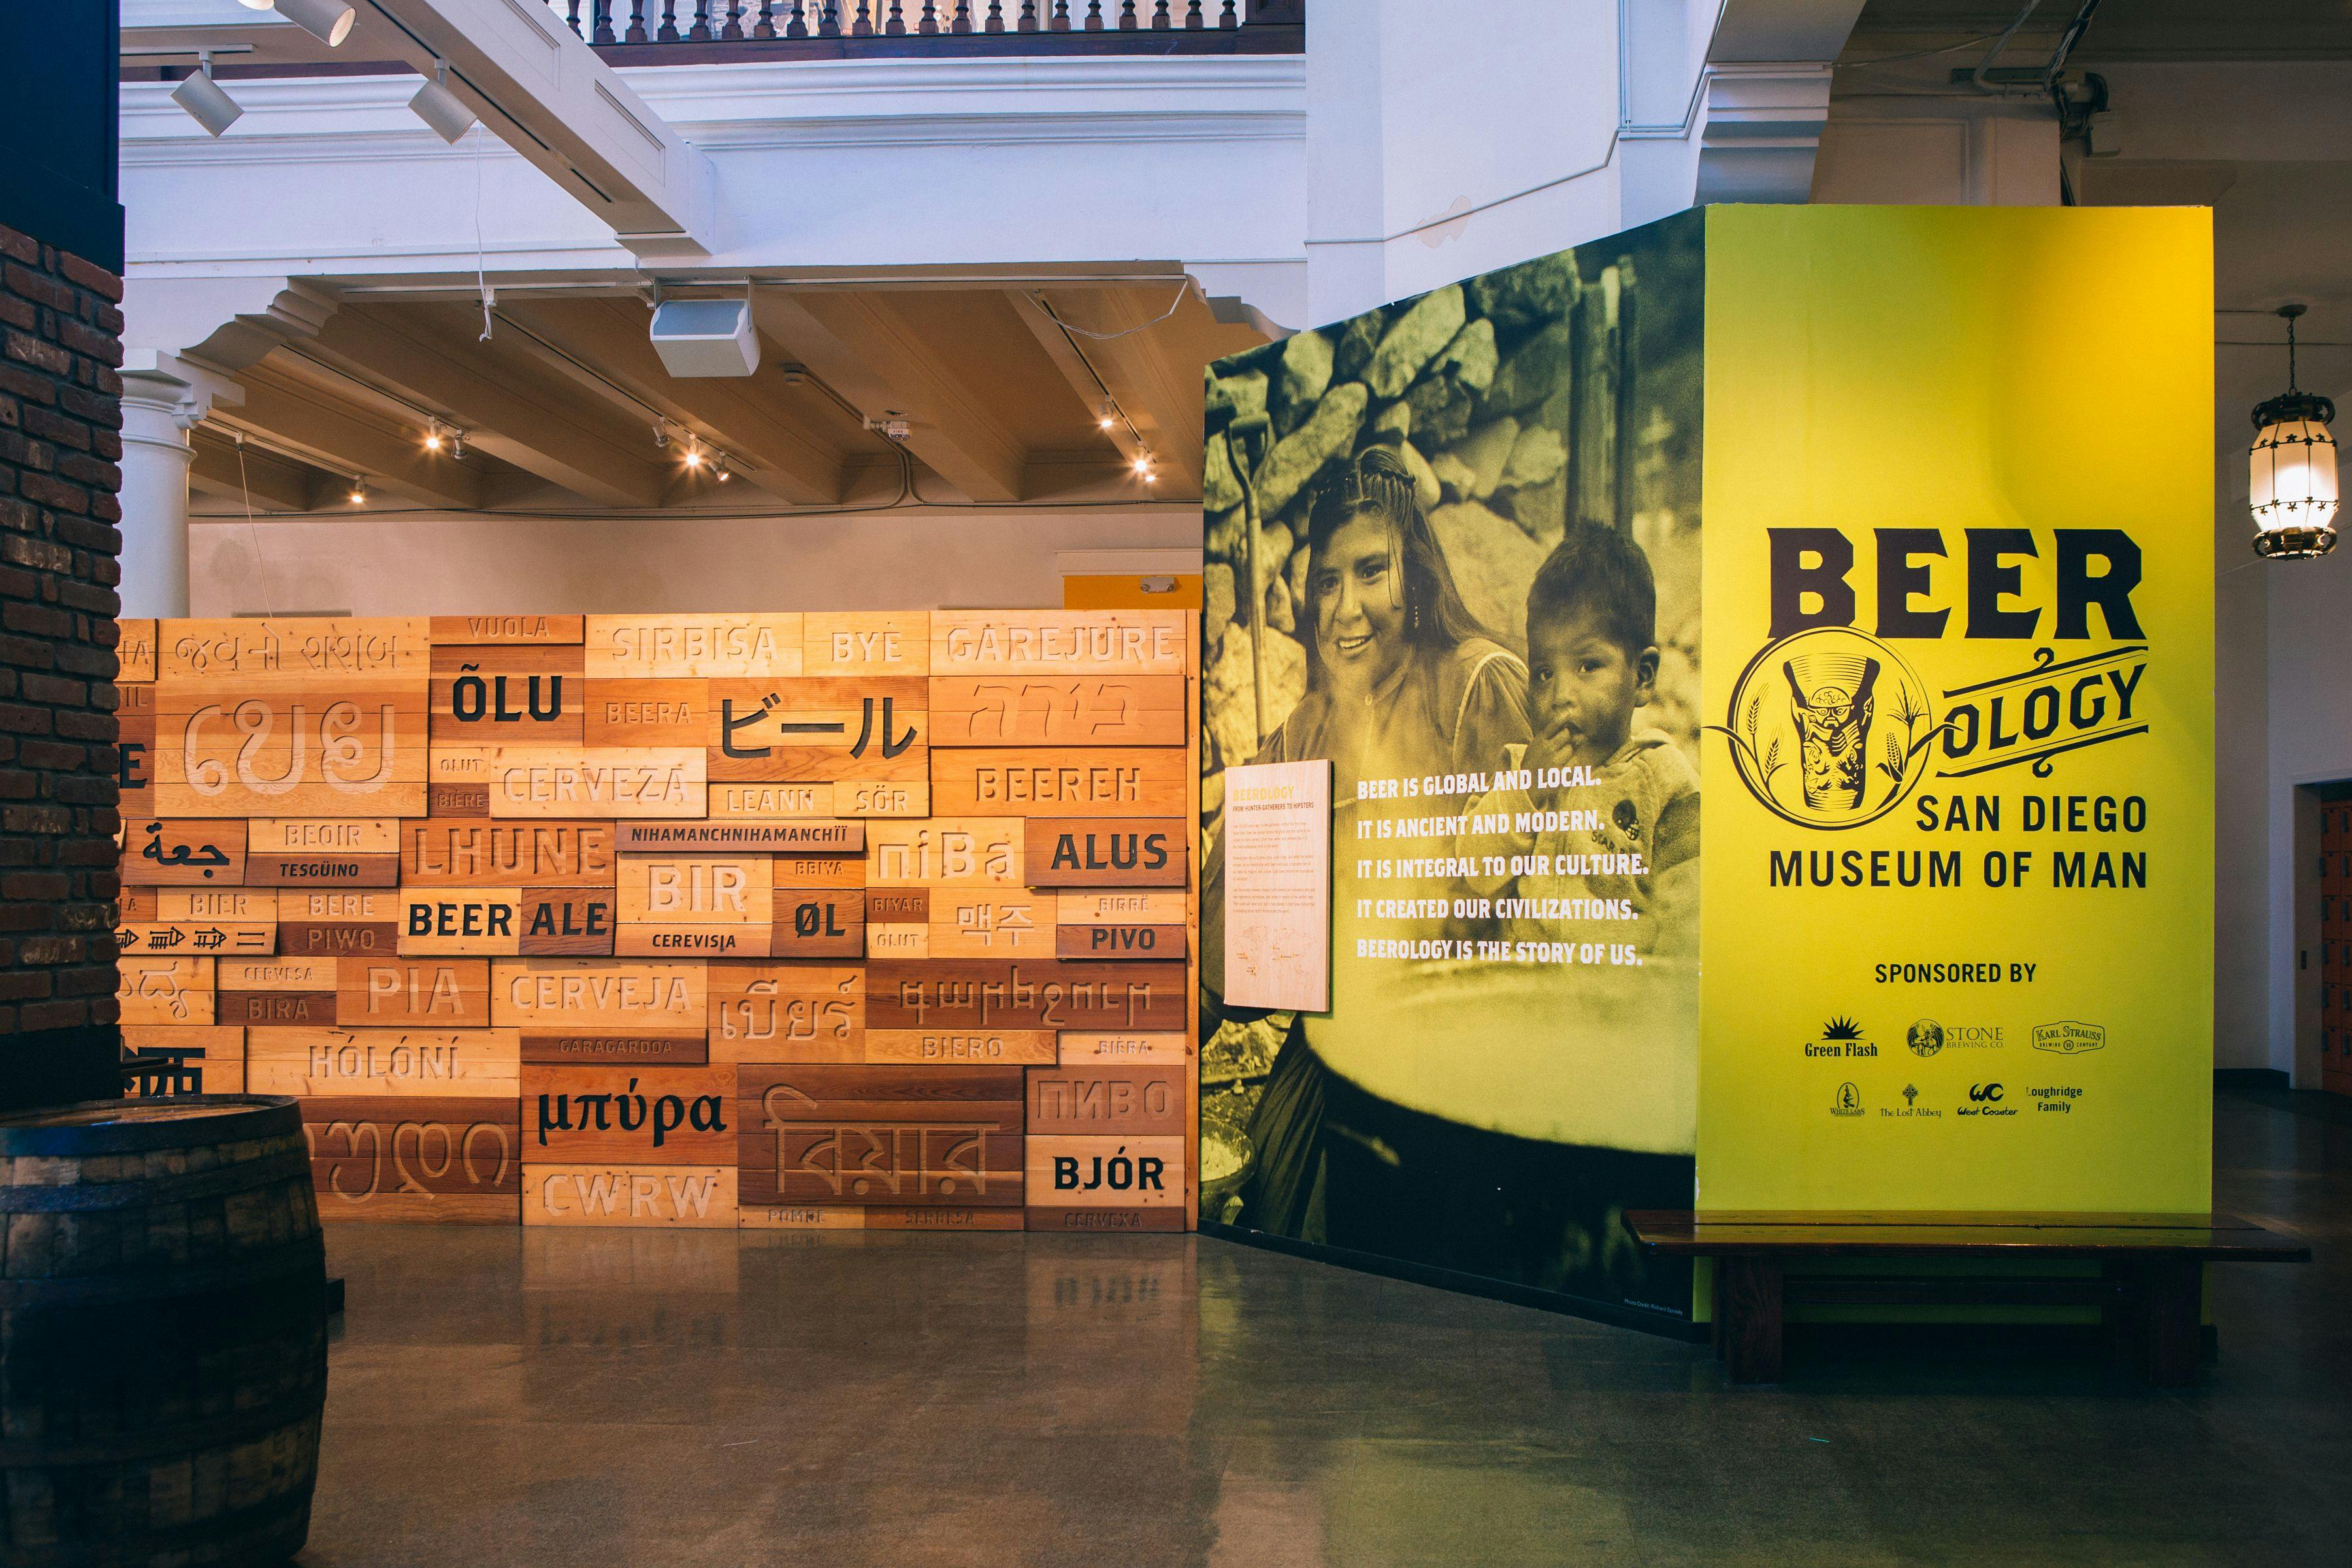 Exhibit entrance wall of "BEERology" featuring a wooden panel of the word "beer" in different languages.